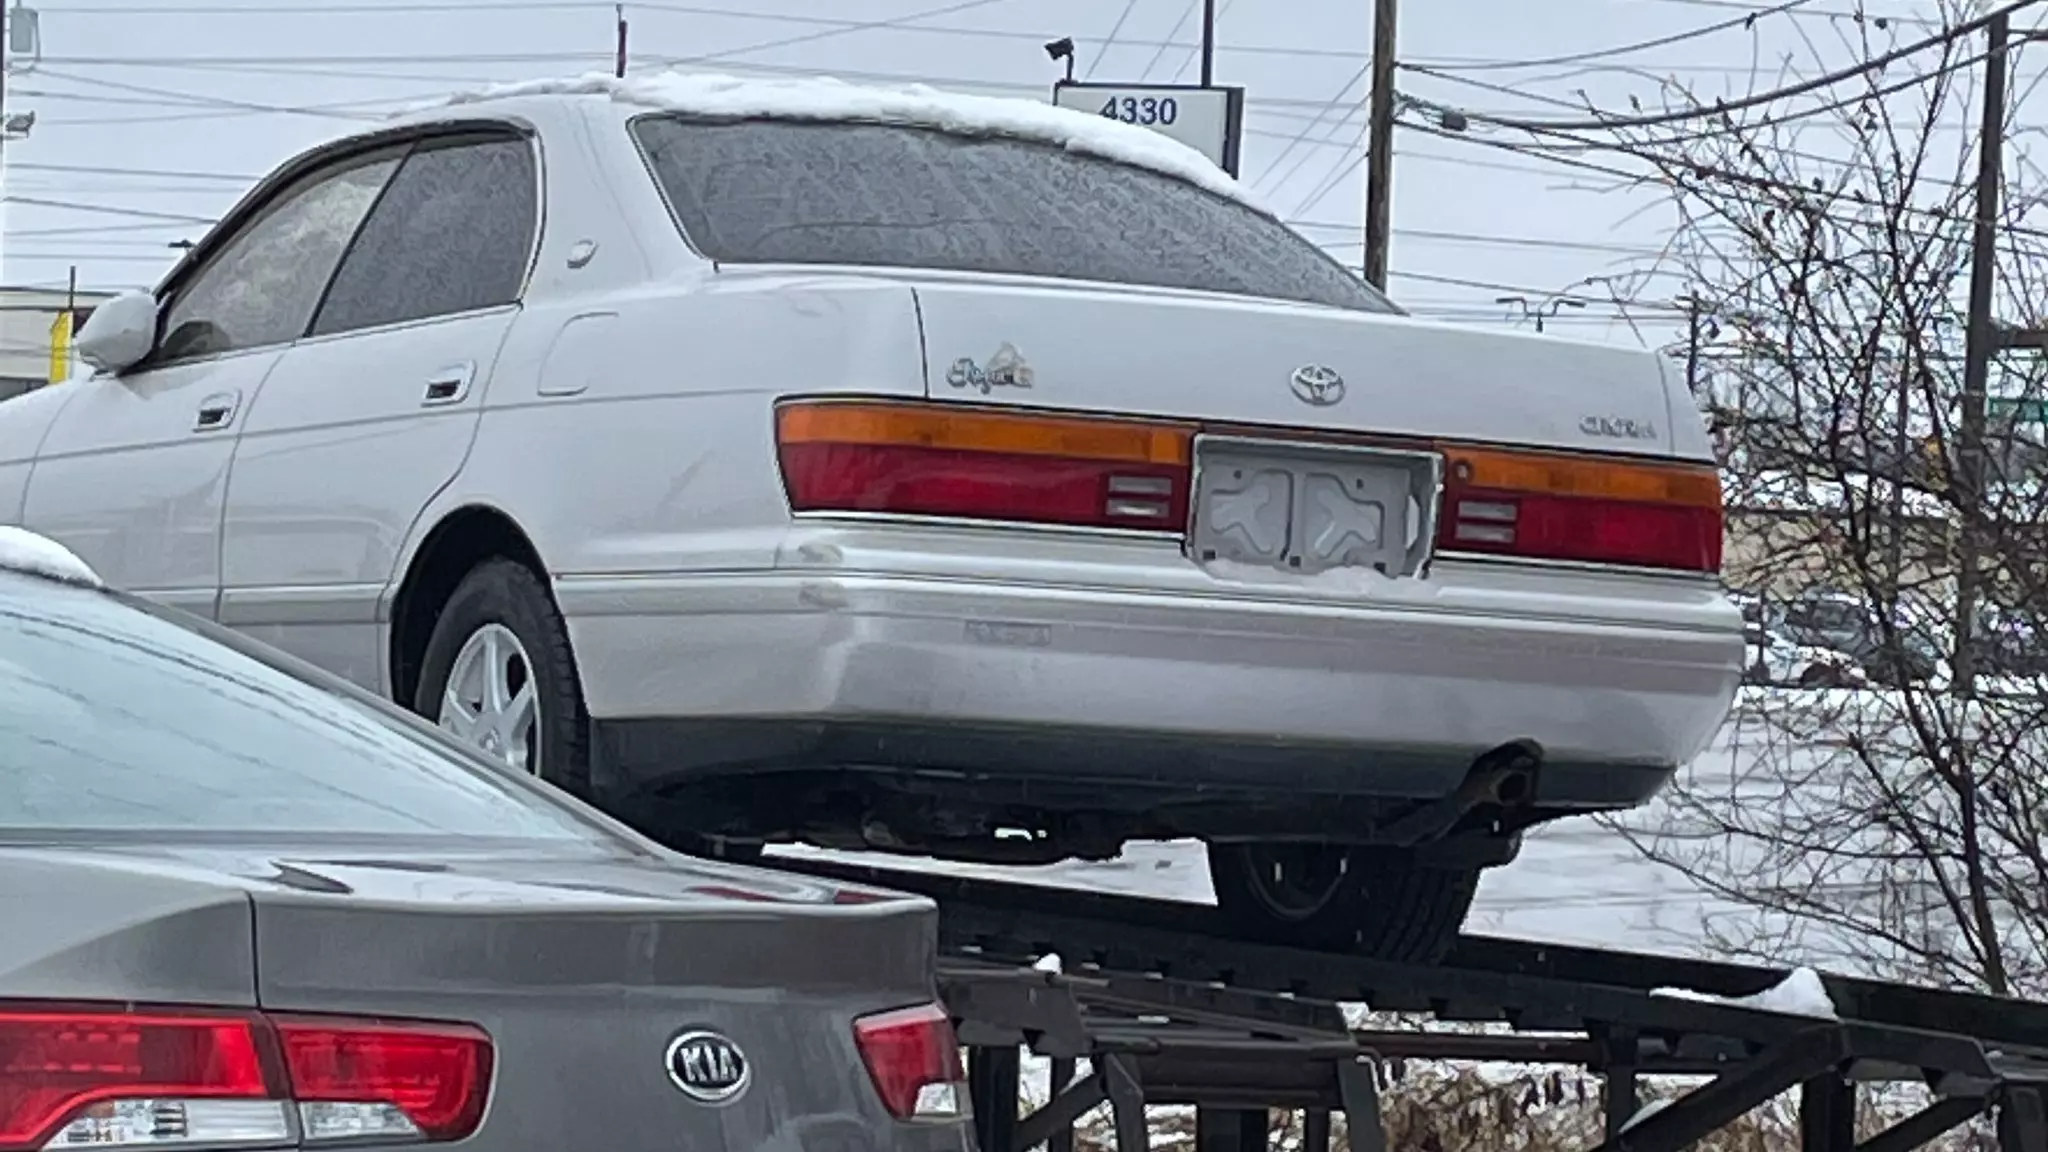 Why Is There a JDM Toyota Crown at a Random Dealership in Ohio?